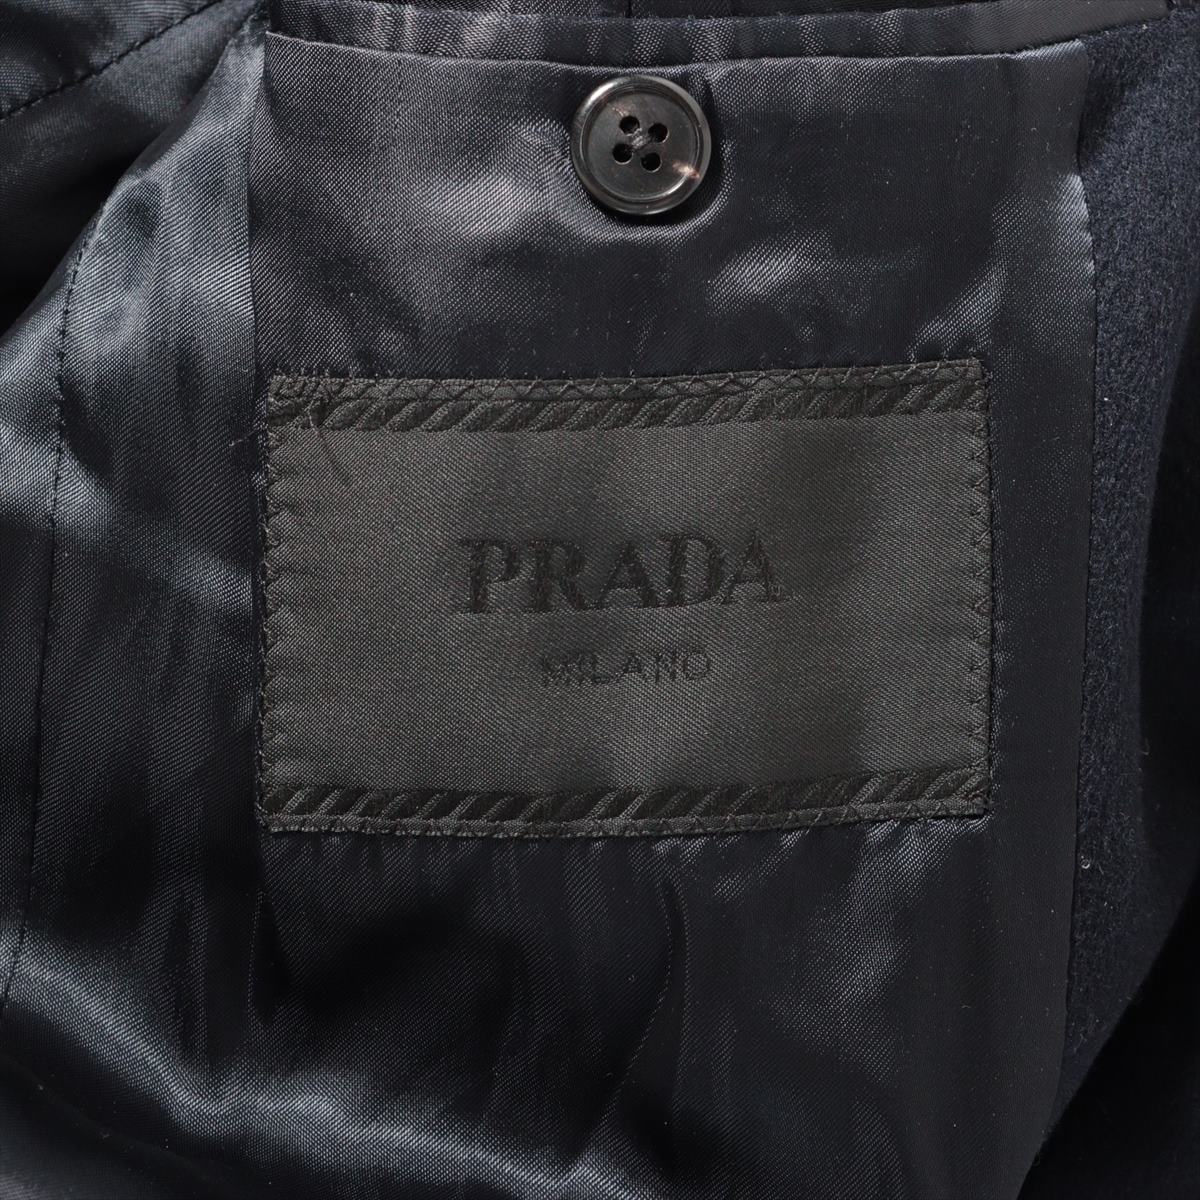 Prada Cashmere Chester Coat 48R  Naive UC333D Clothed Casimir Shirted  Clothes